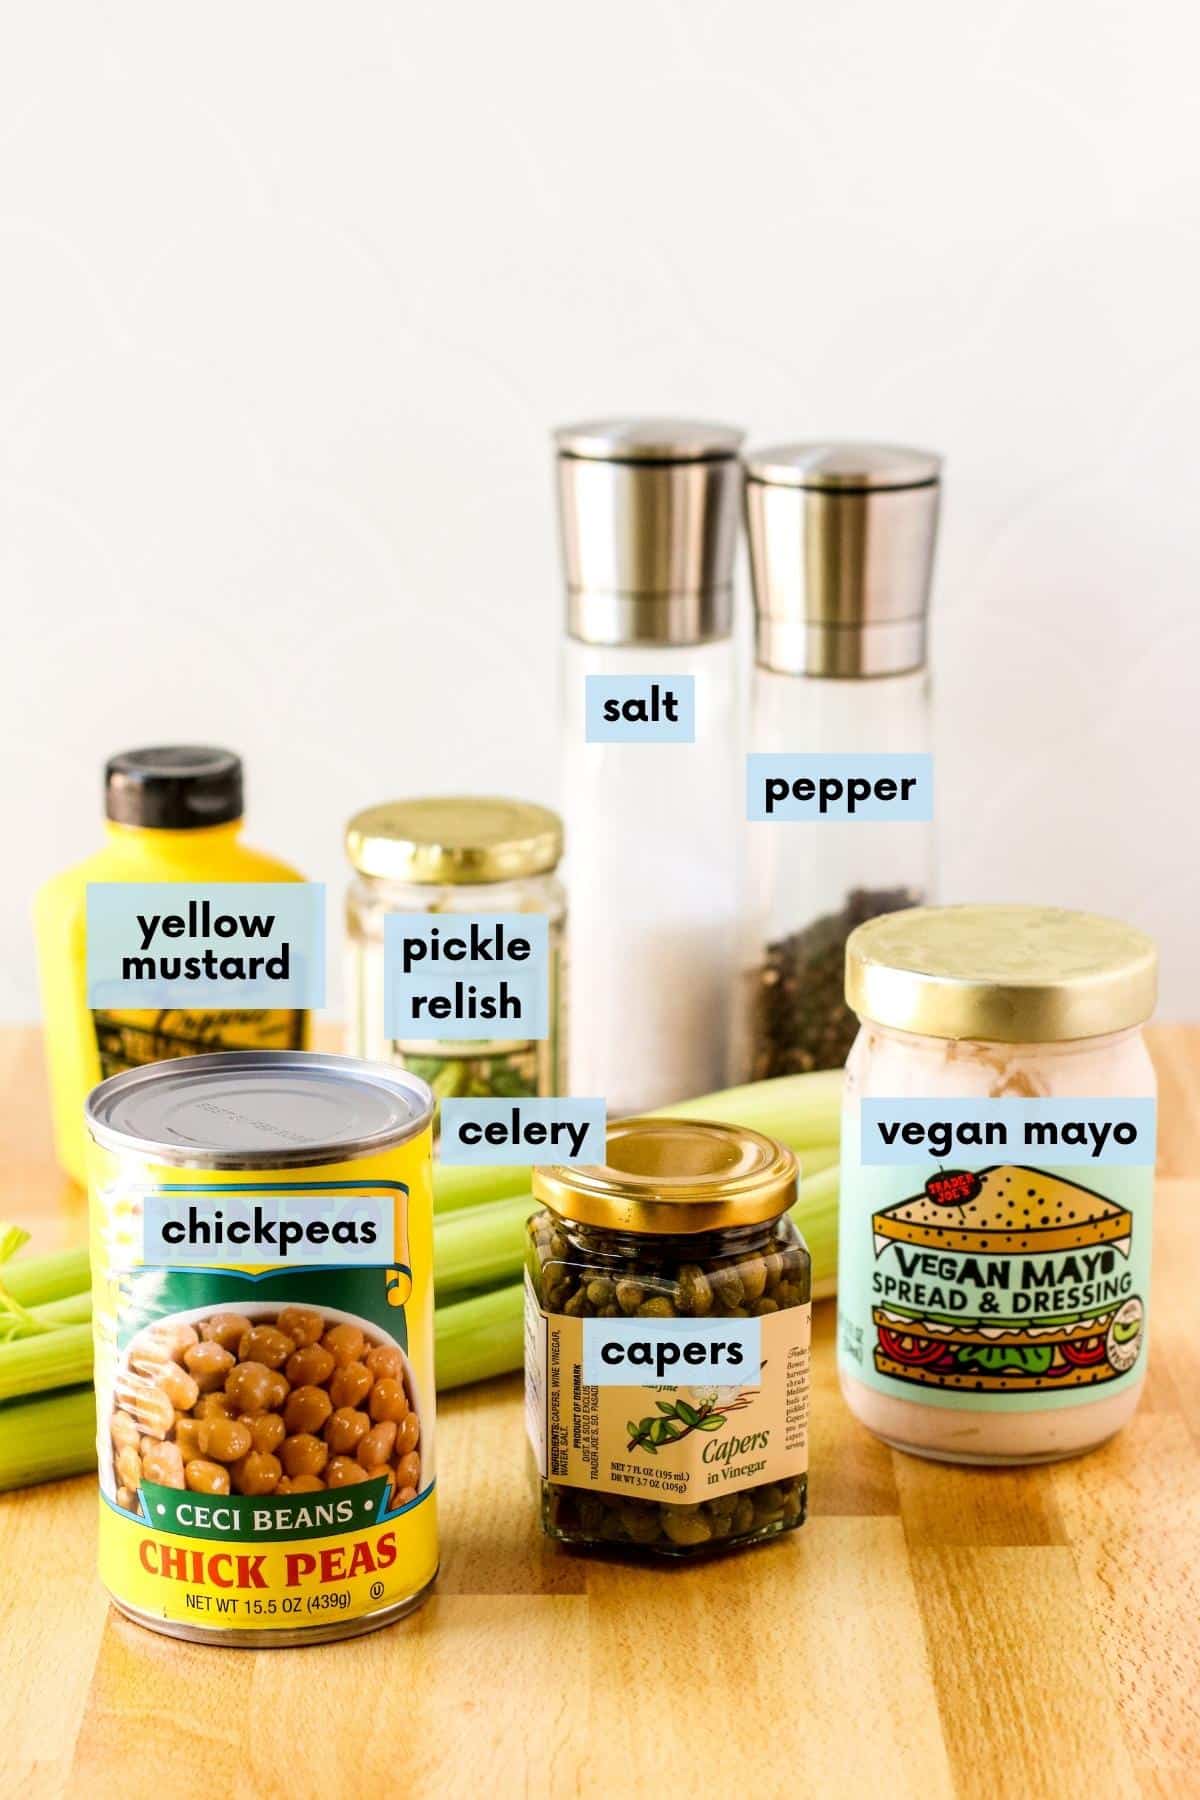 Ingredients for this recipe with text labels on a cutting board: Can of chickpeas, bottle of yellow mustard, jar of pickle relish, jar of capers, bunch of celery, jar of vegan mayo, and salt and pepper grinders.